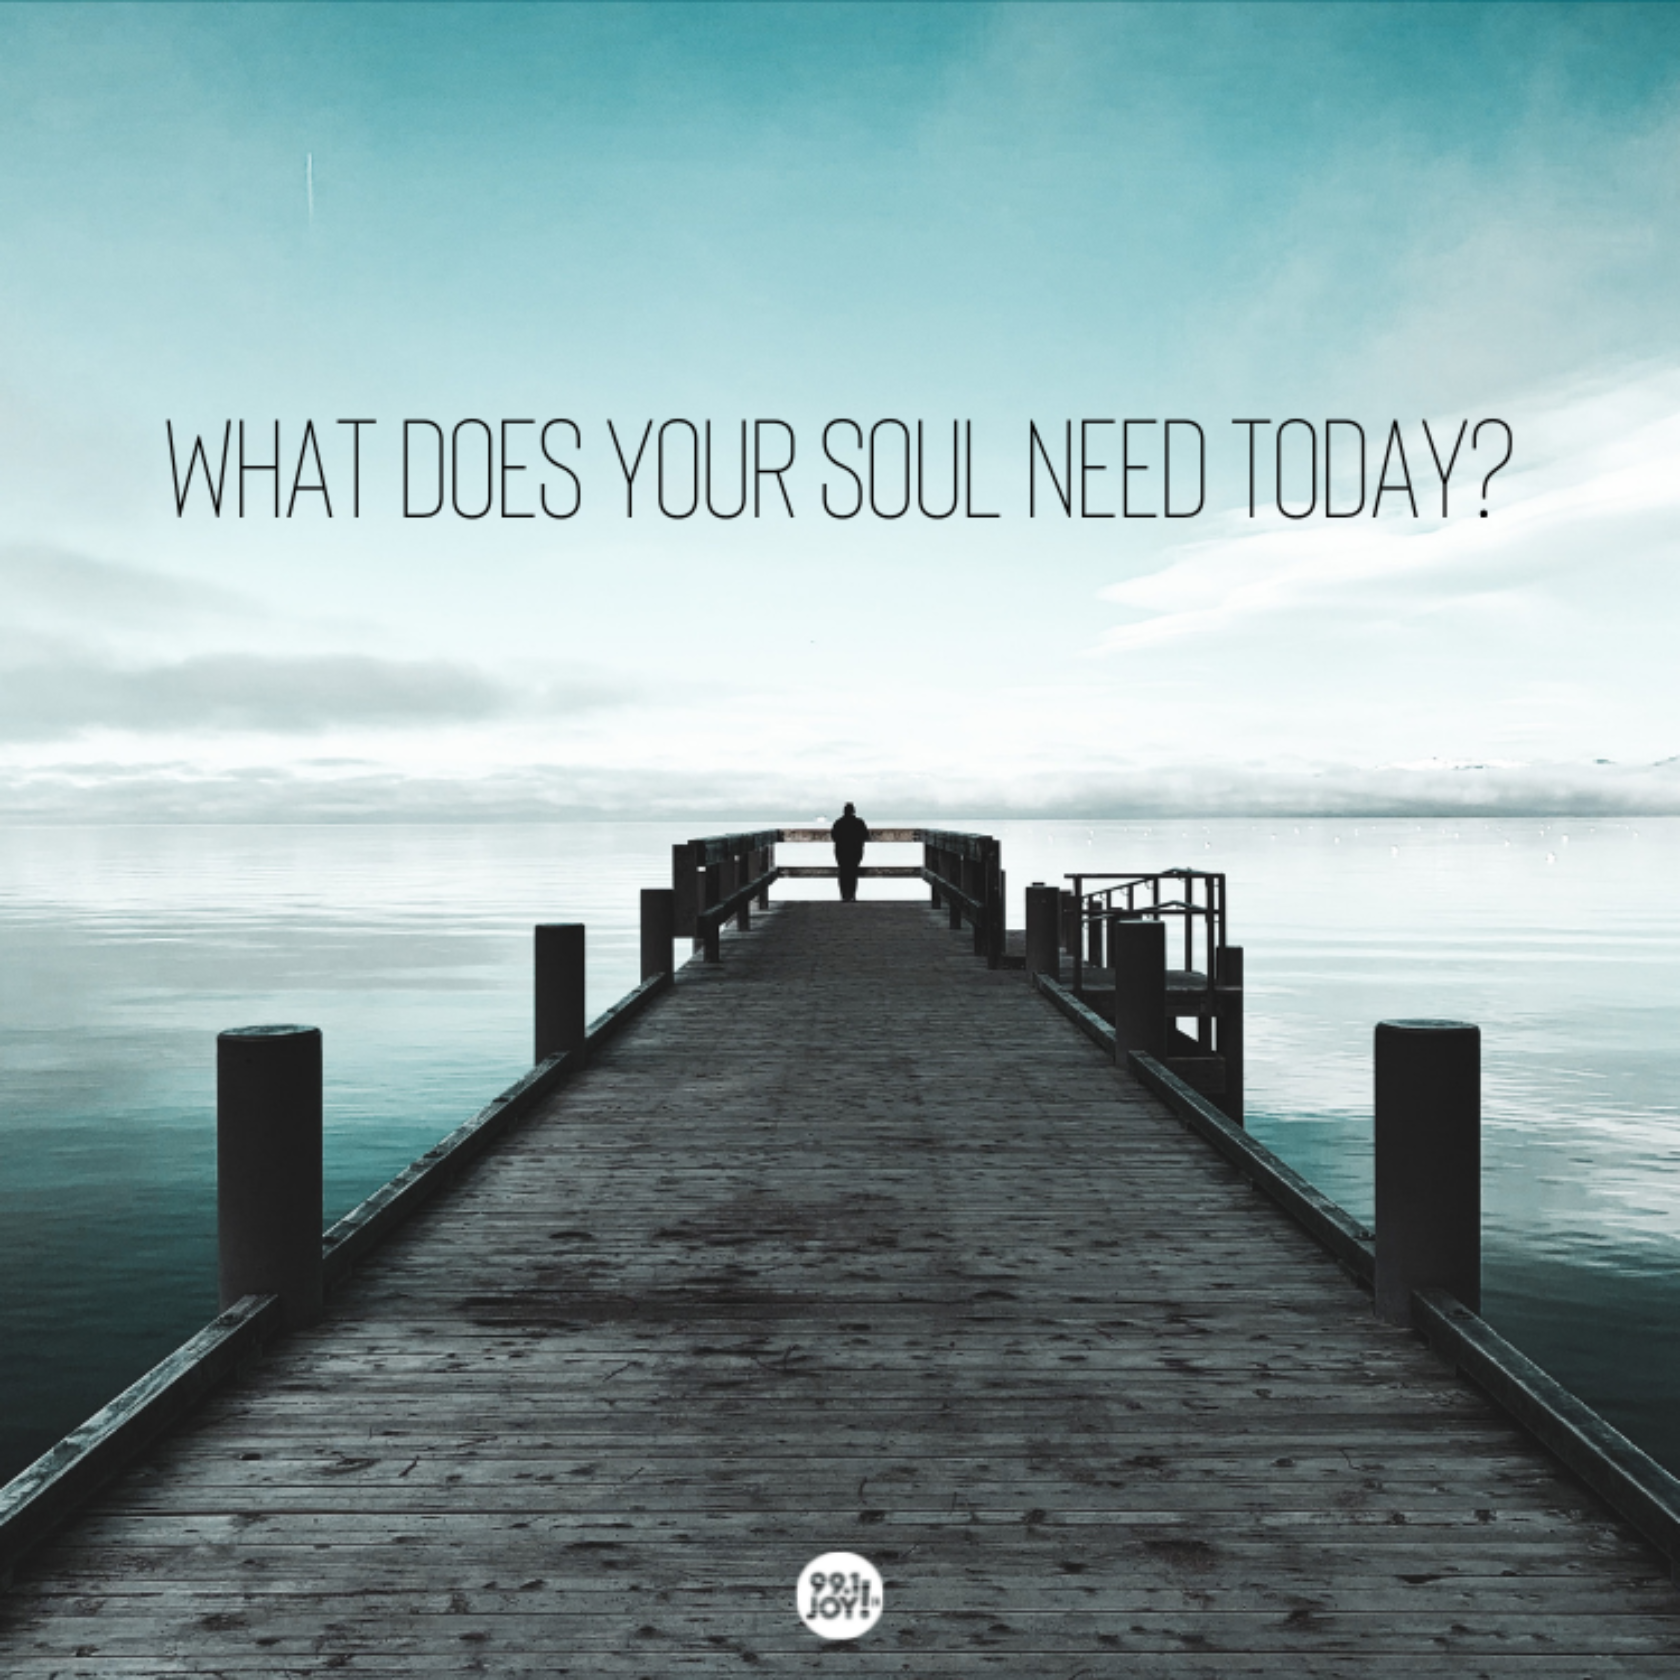 What Does Your Soul Need Today?